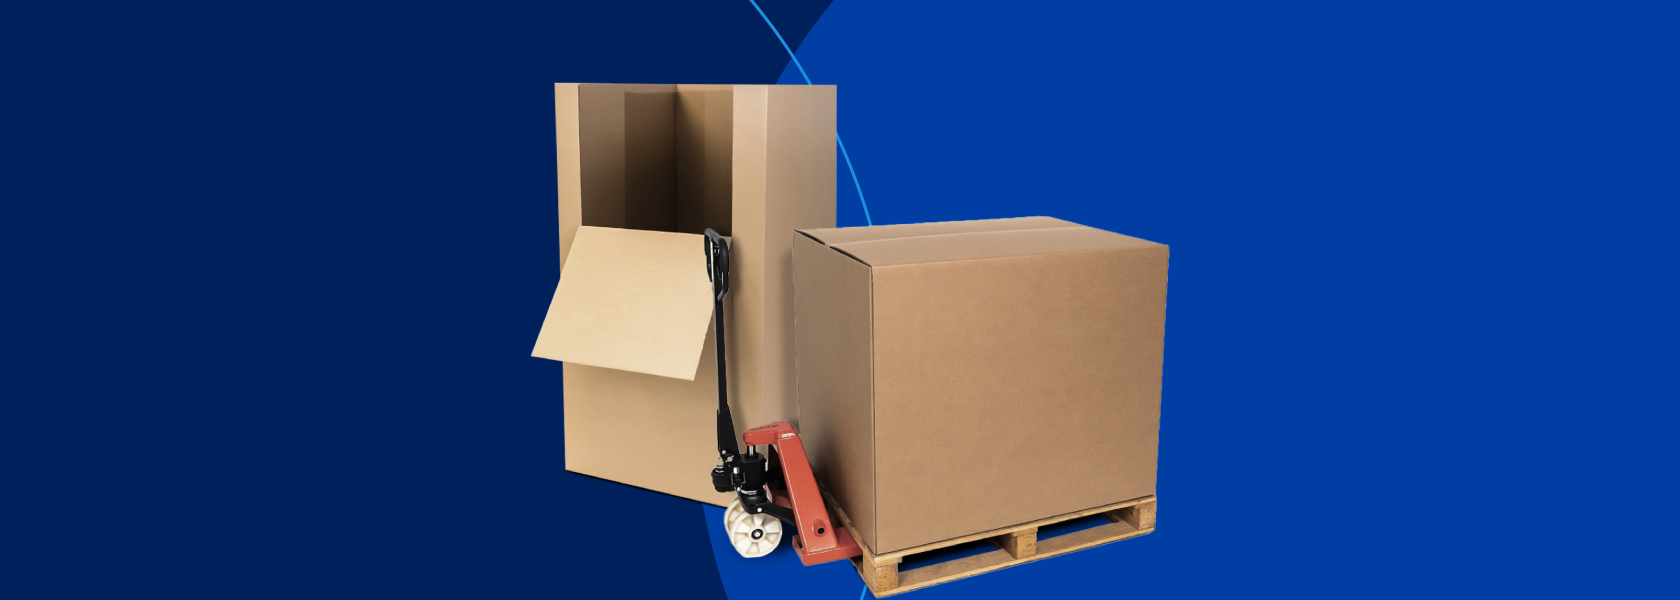 Buying large cardboard boxes guide